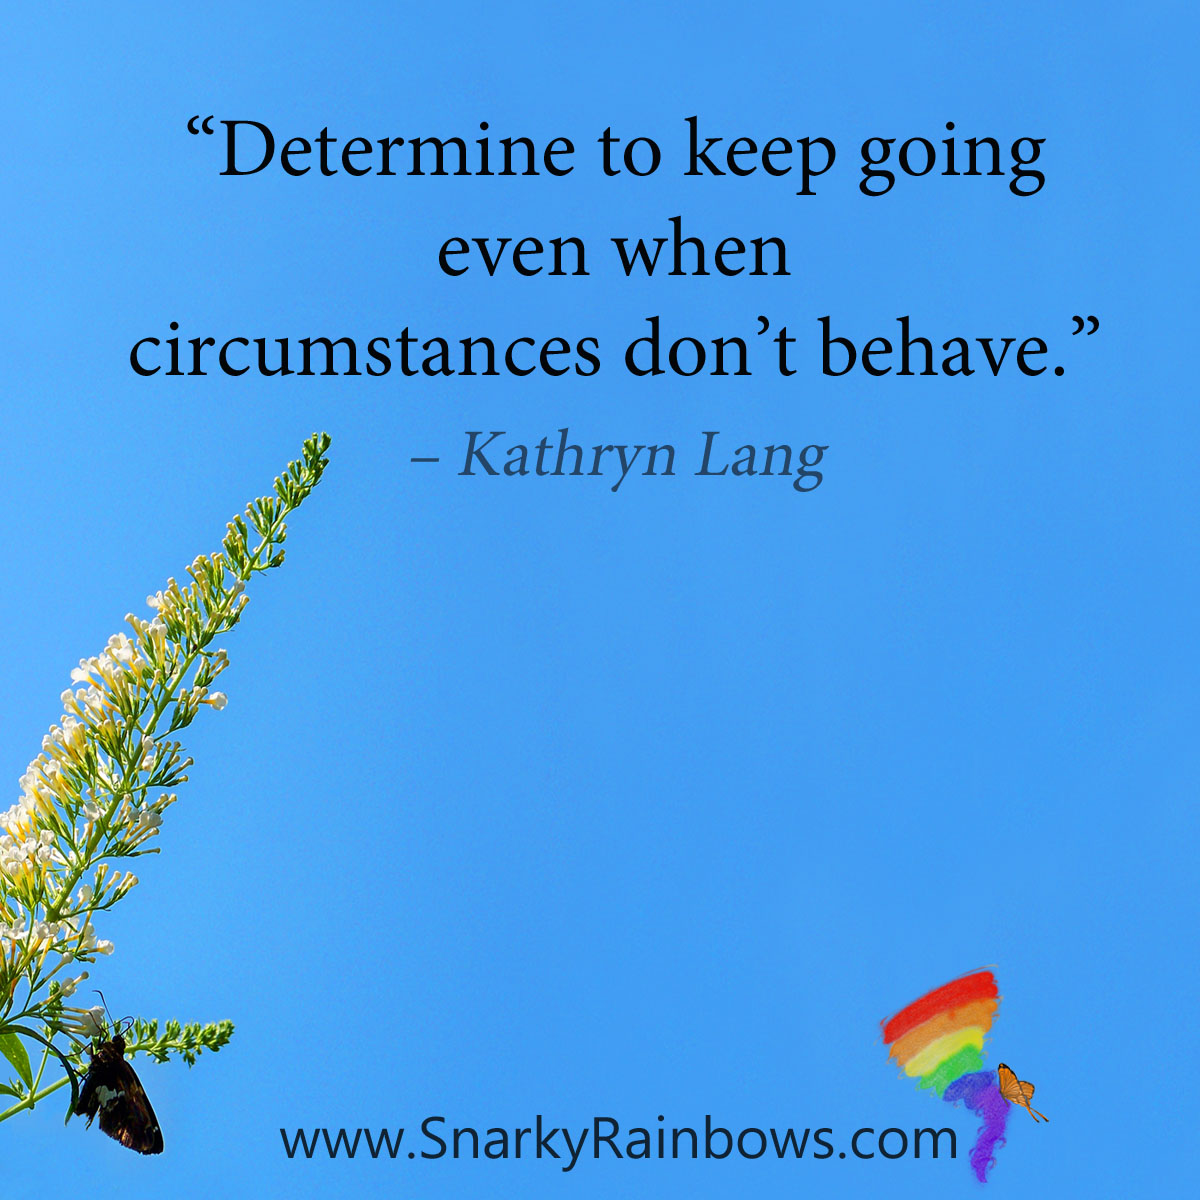 #QuoteoftheDay - determined to keep going